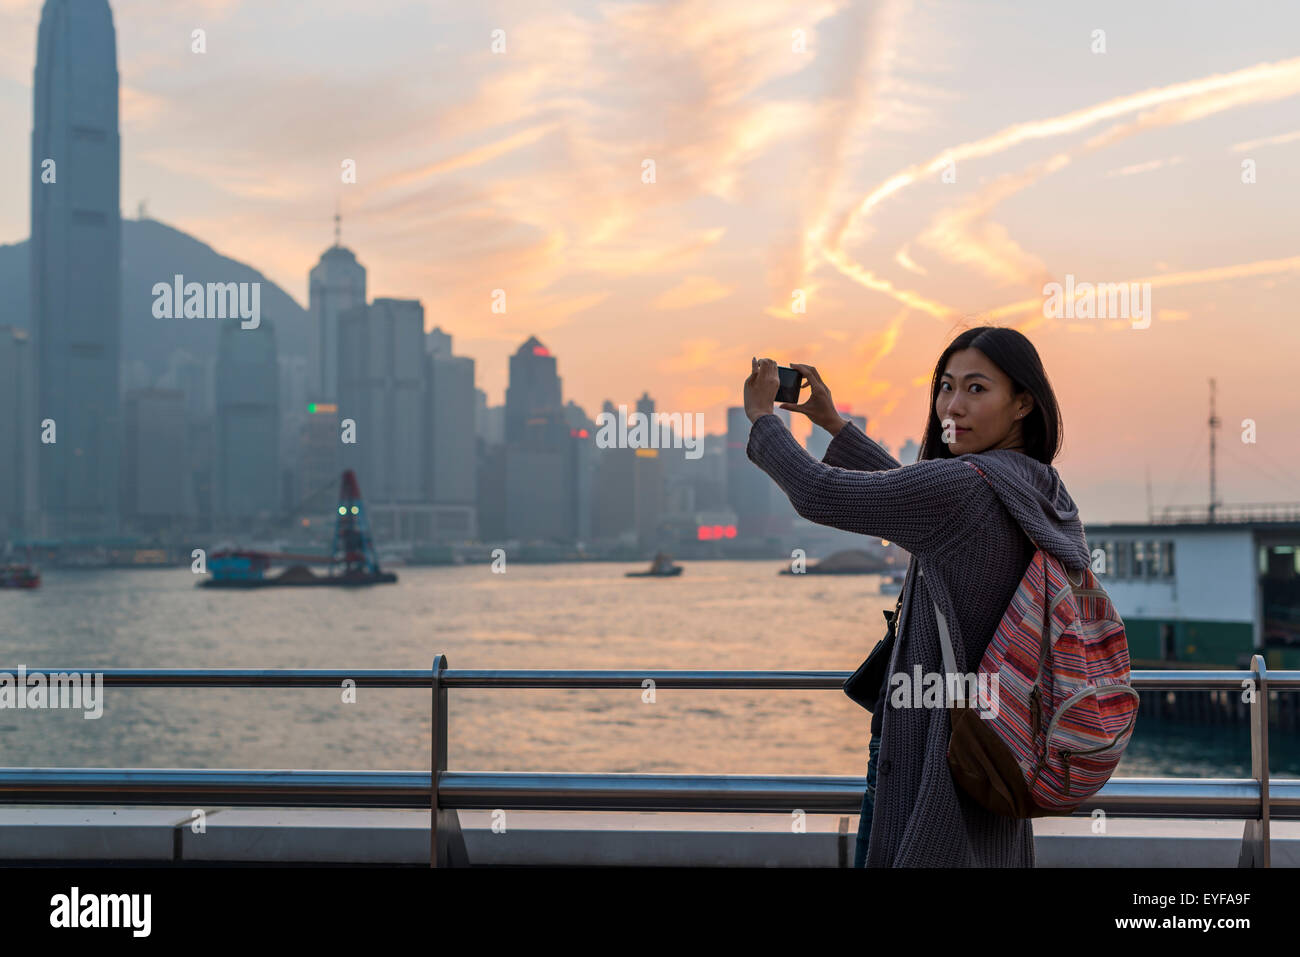 A young woman at the waterfront taking pictures of the skyline at sunset, Kowloon; Hong Kong, China Stock Photo